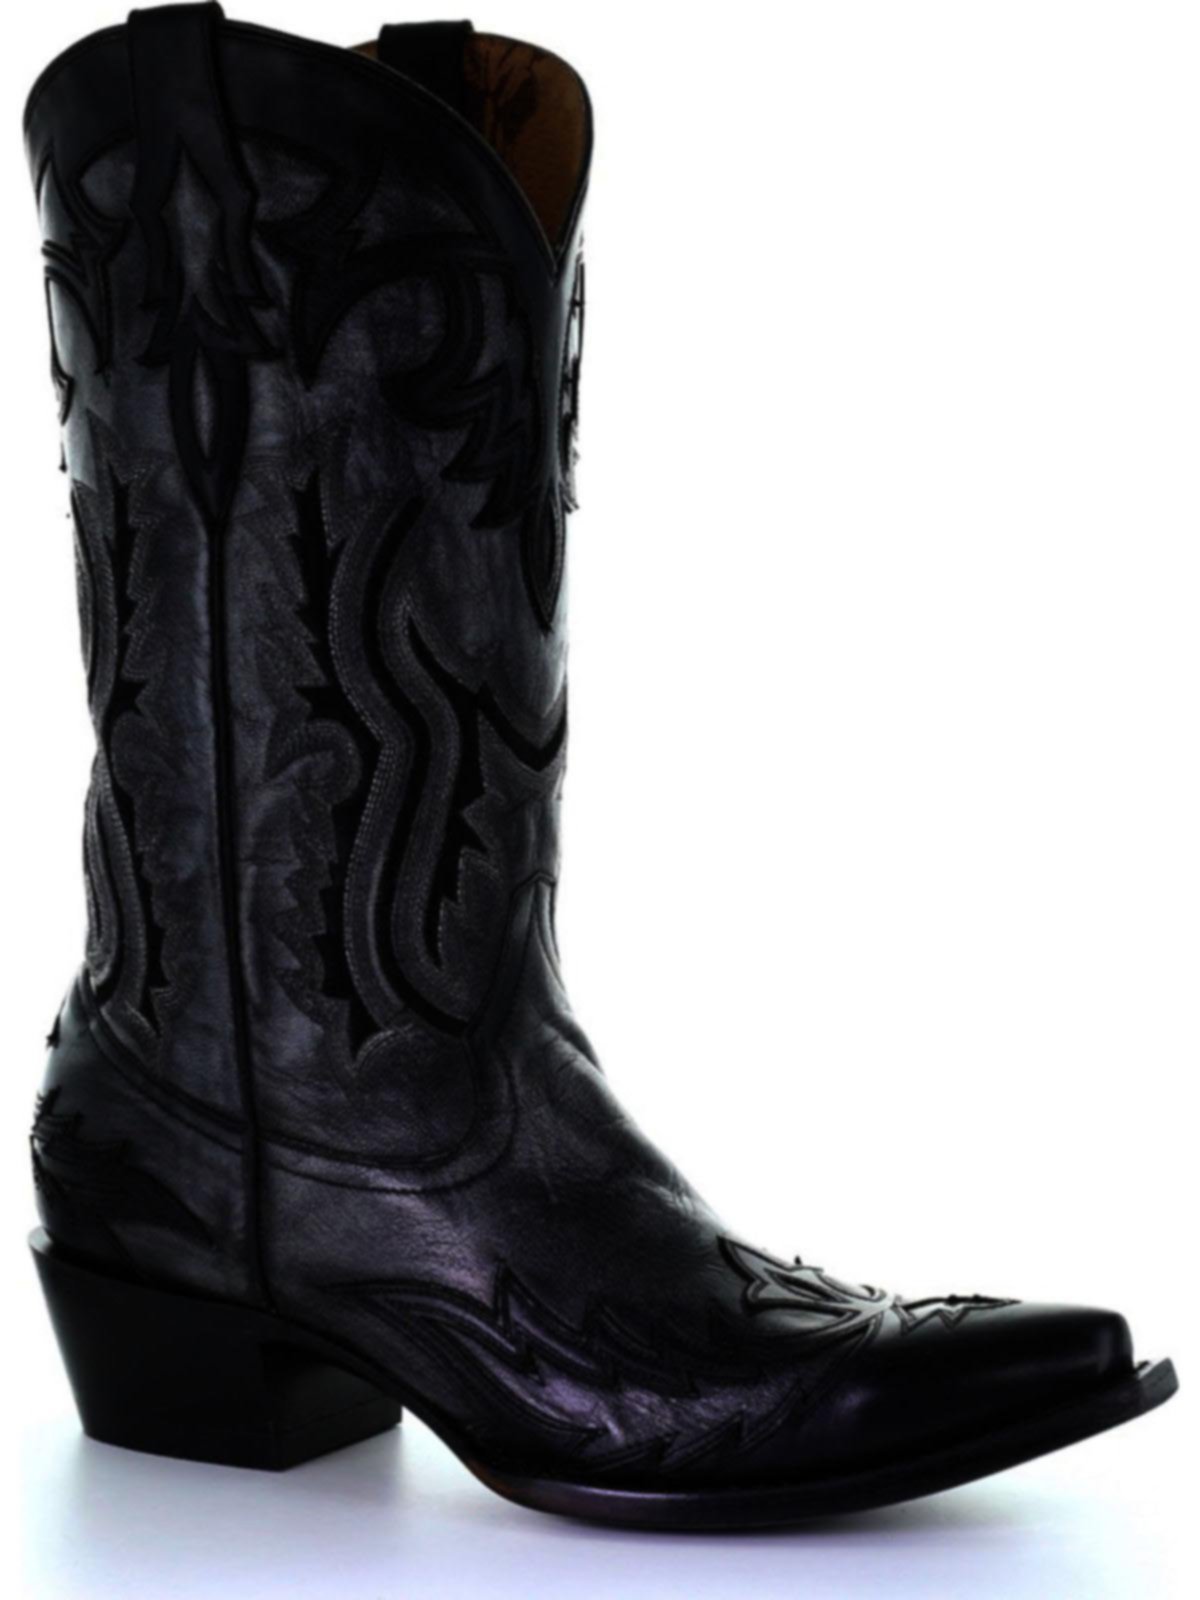 Shop Corral Mens Black Embroidery Overlay Cowboy Boot G1493 | Save Now ...